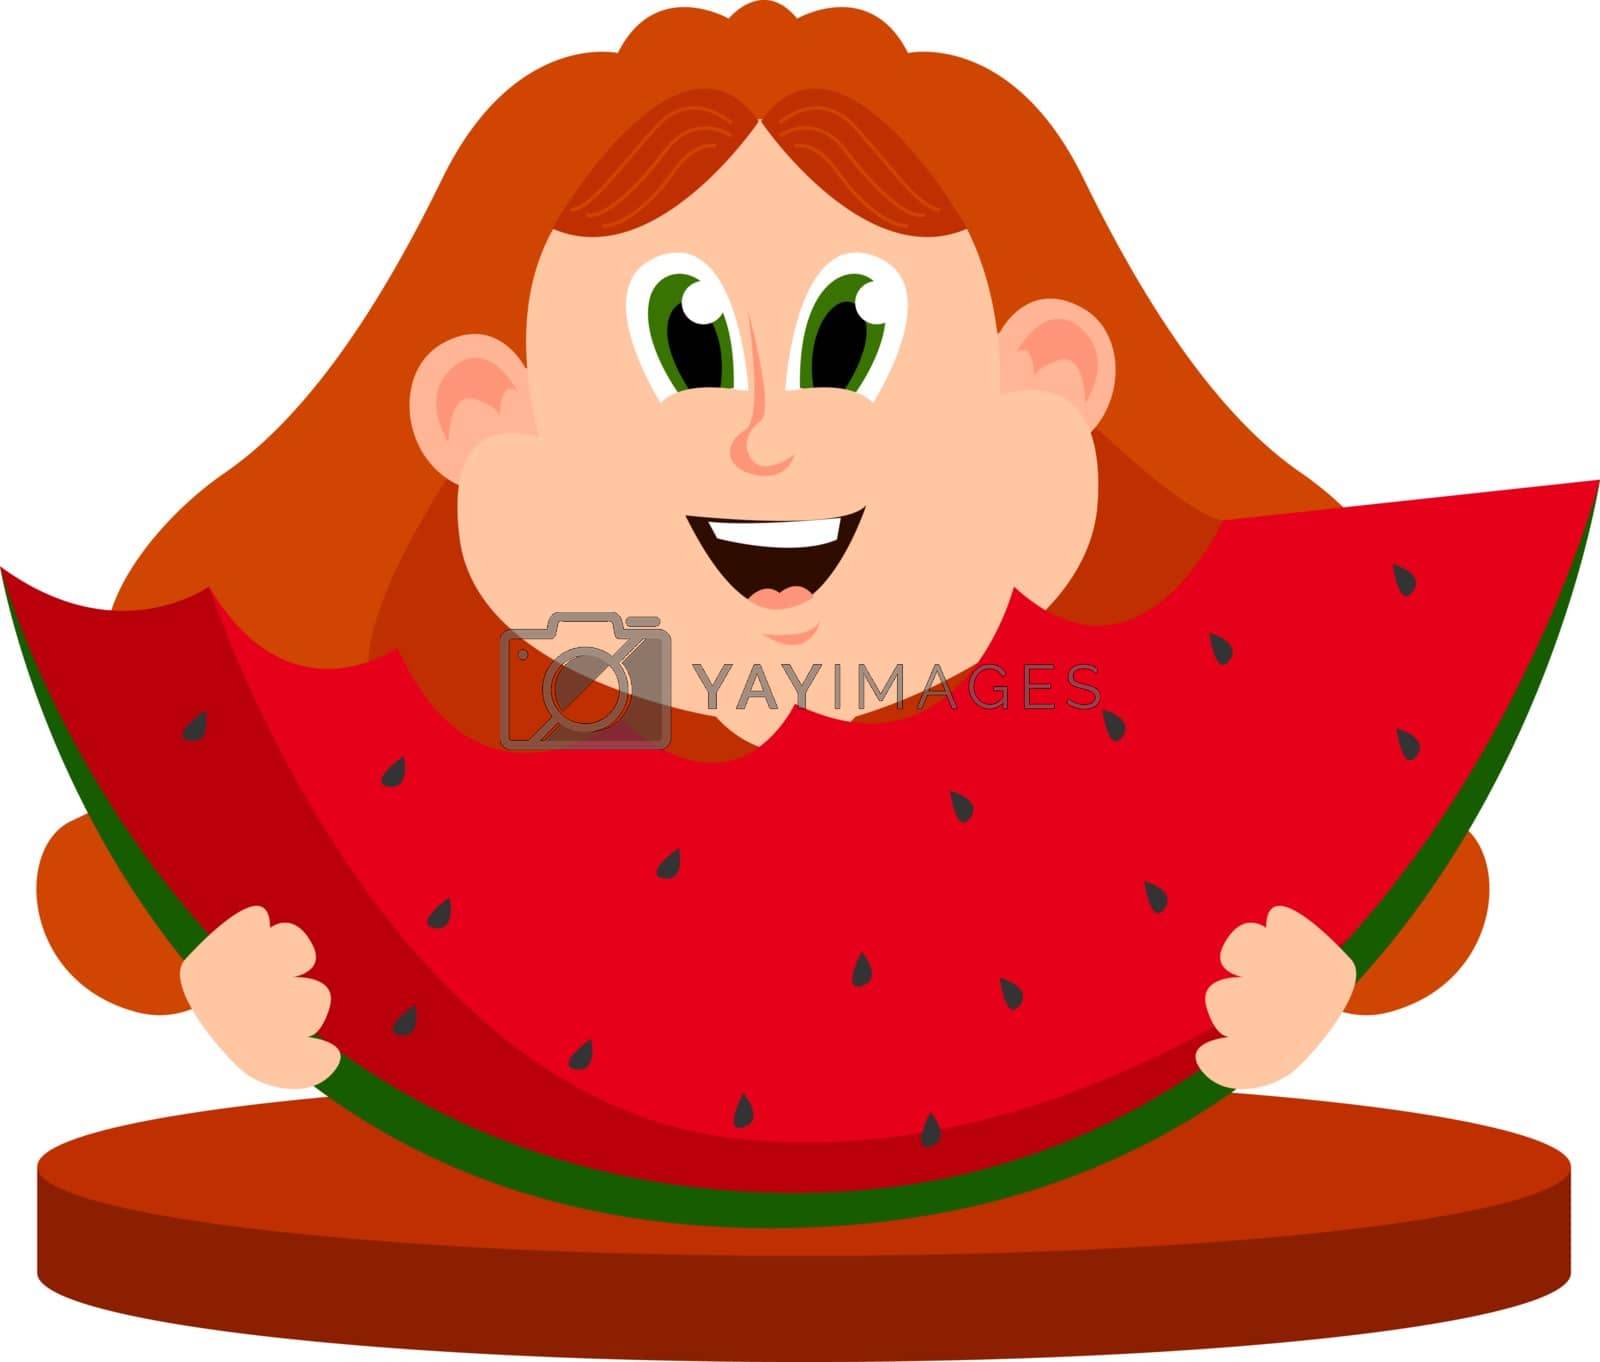 Royalty free image of Piece of watermelon, illustration, vector on white background. by Morphart